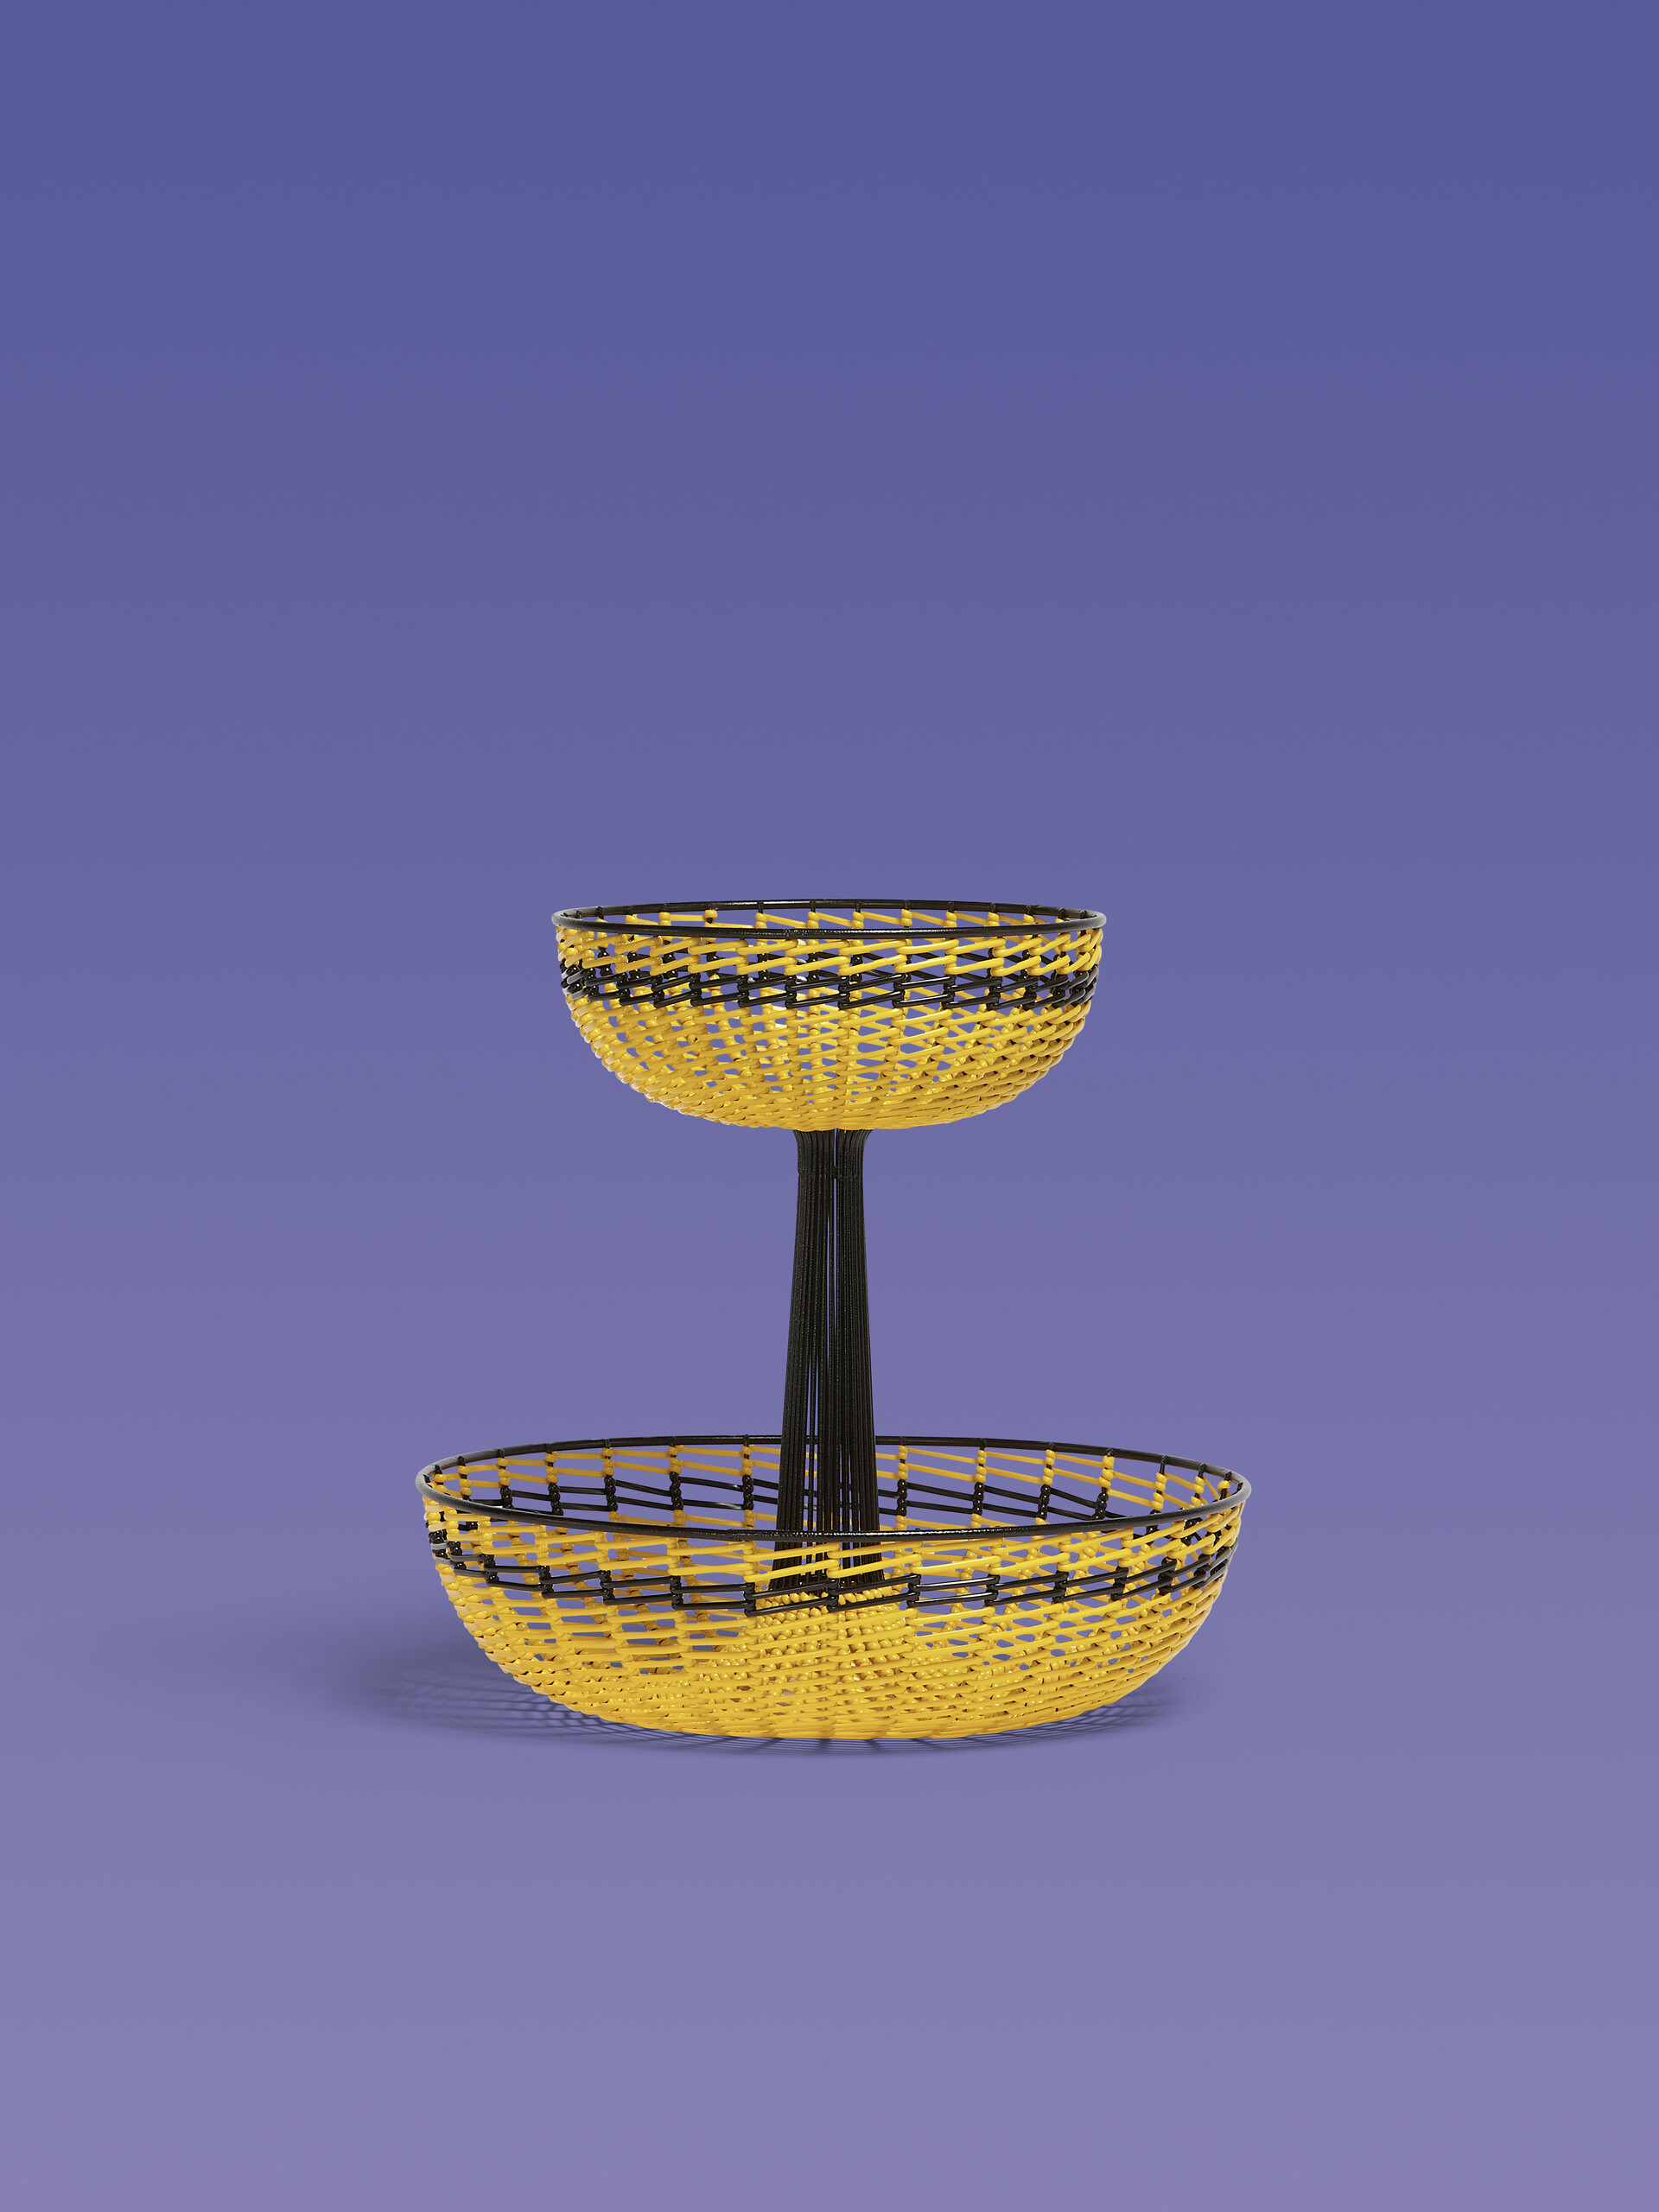 MARNI MARKET yellow and black fruit basket - Accessories - Image 1